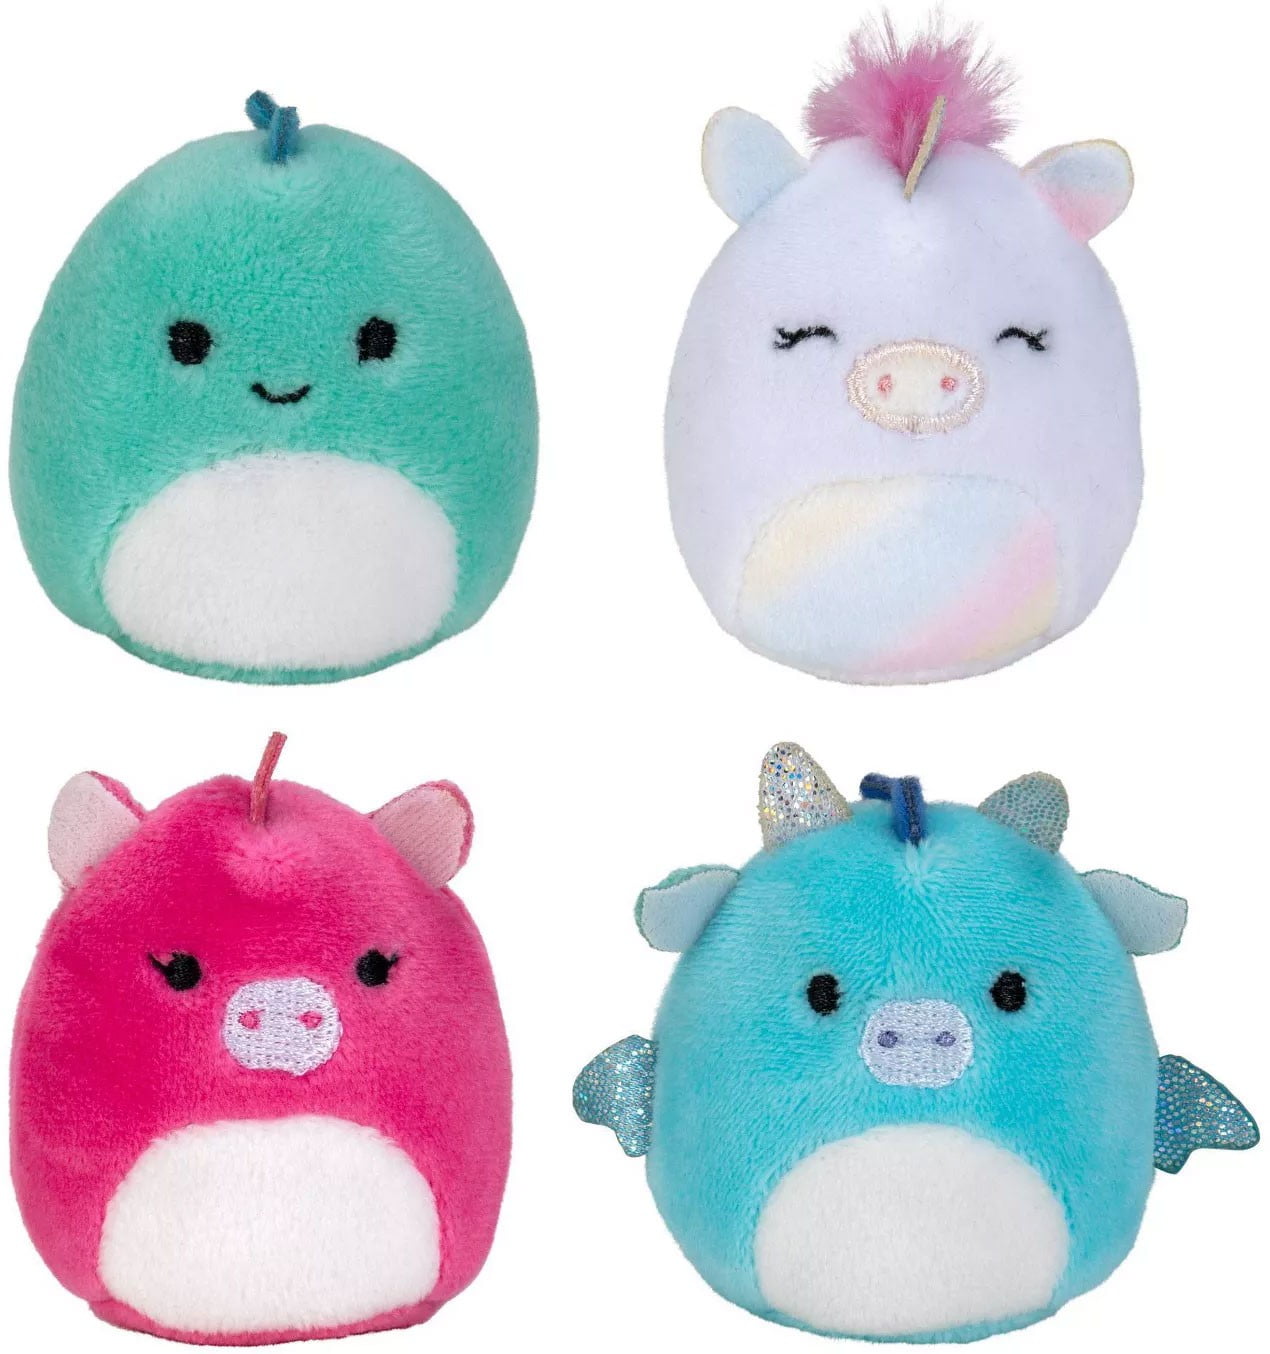 Squishville by Original Squishmallows Play and Display Storage - Four  2-Inch Plu